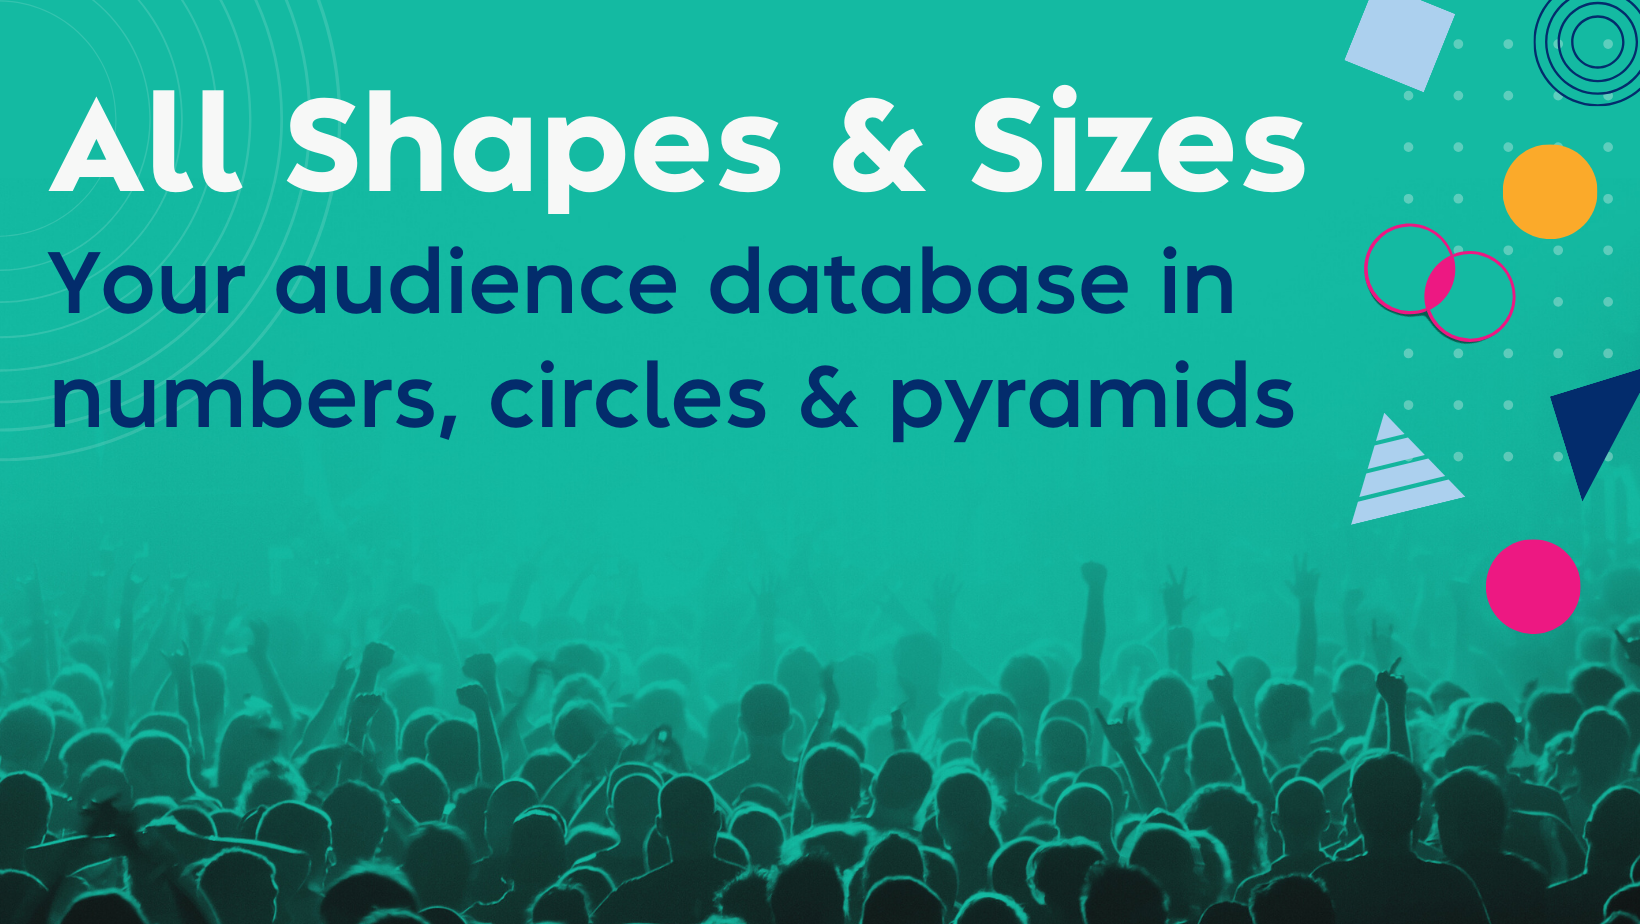 All Shapes & Sizes: Your audience database in numbers, circles & pyramids